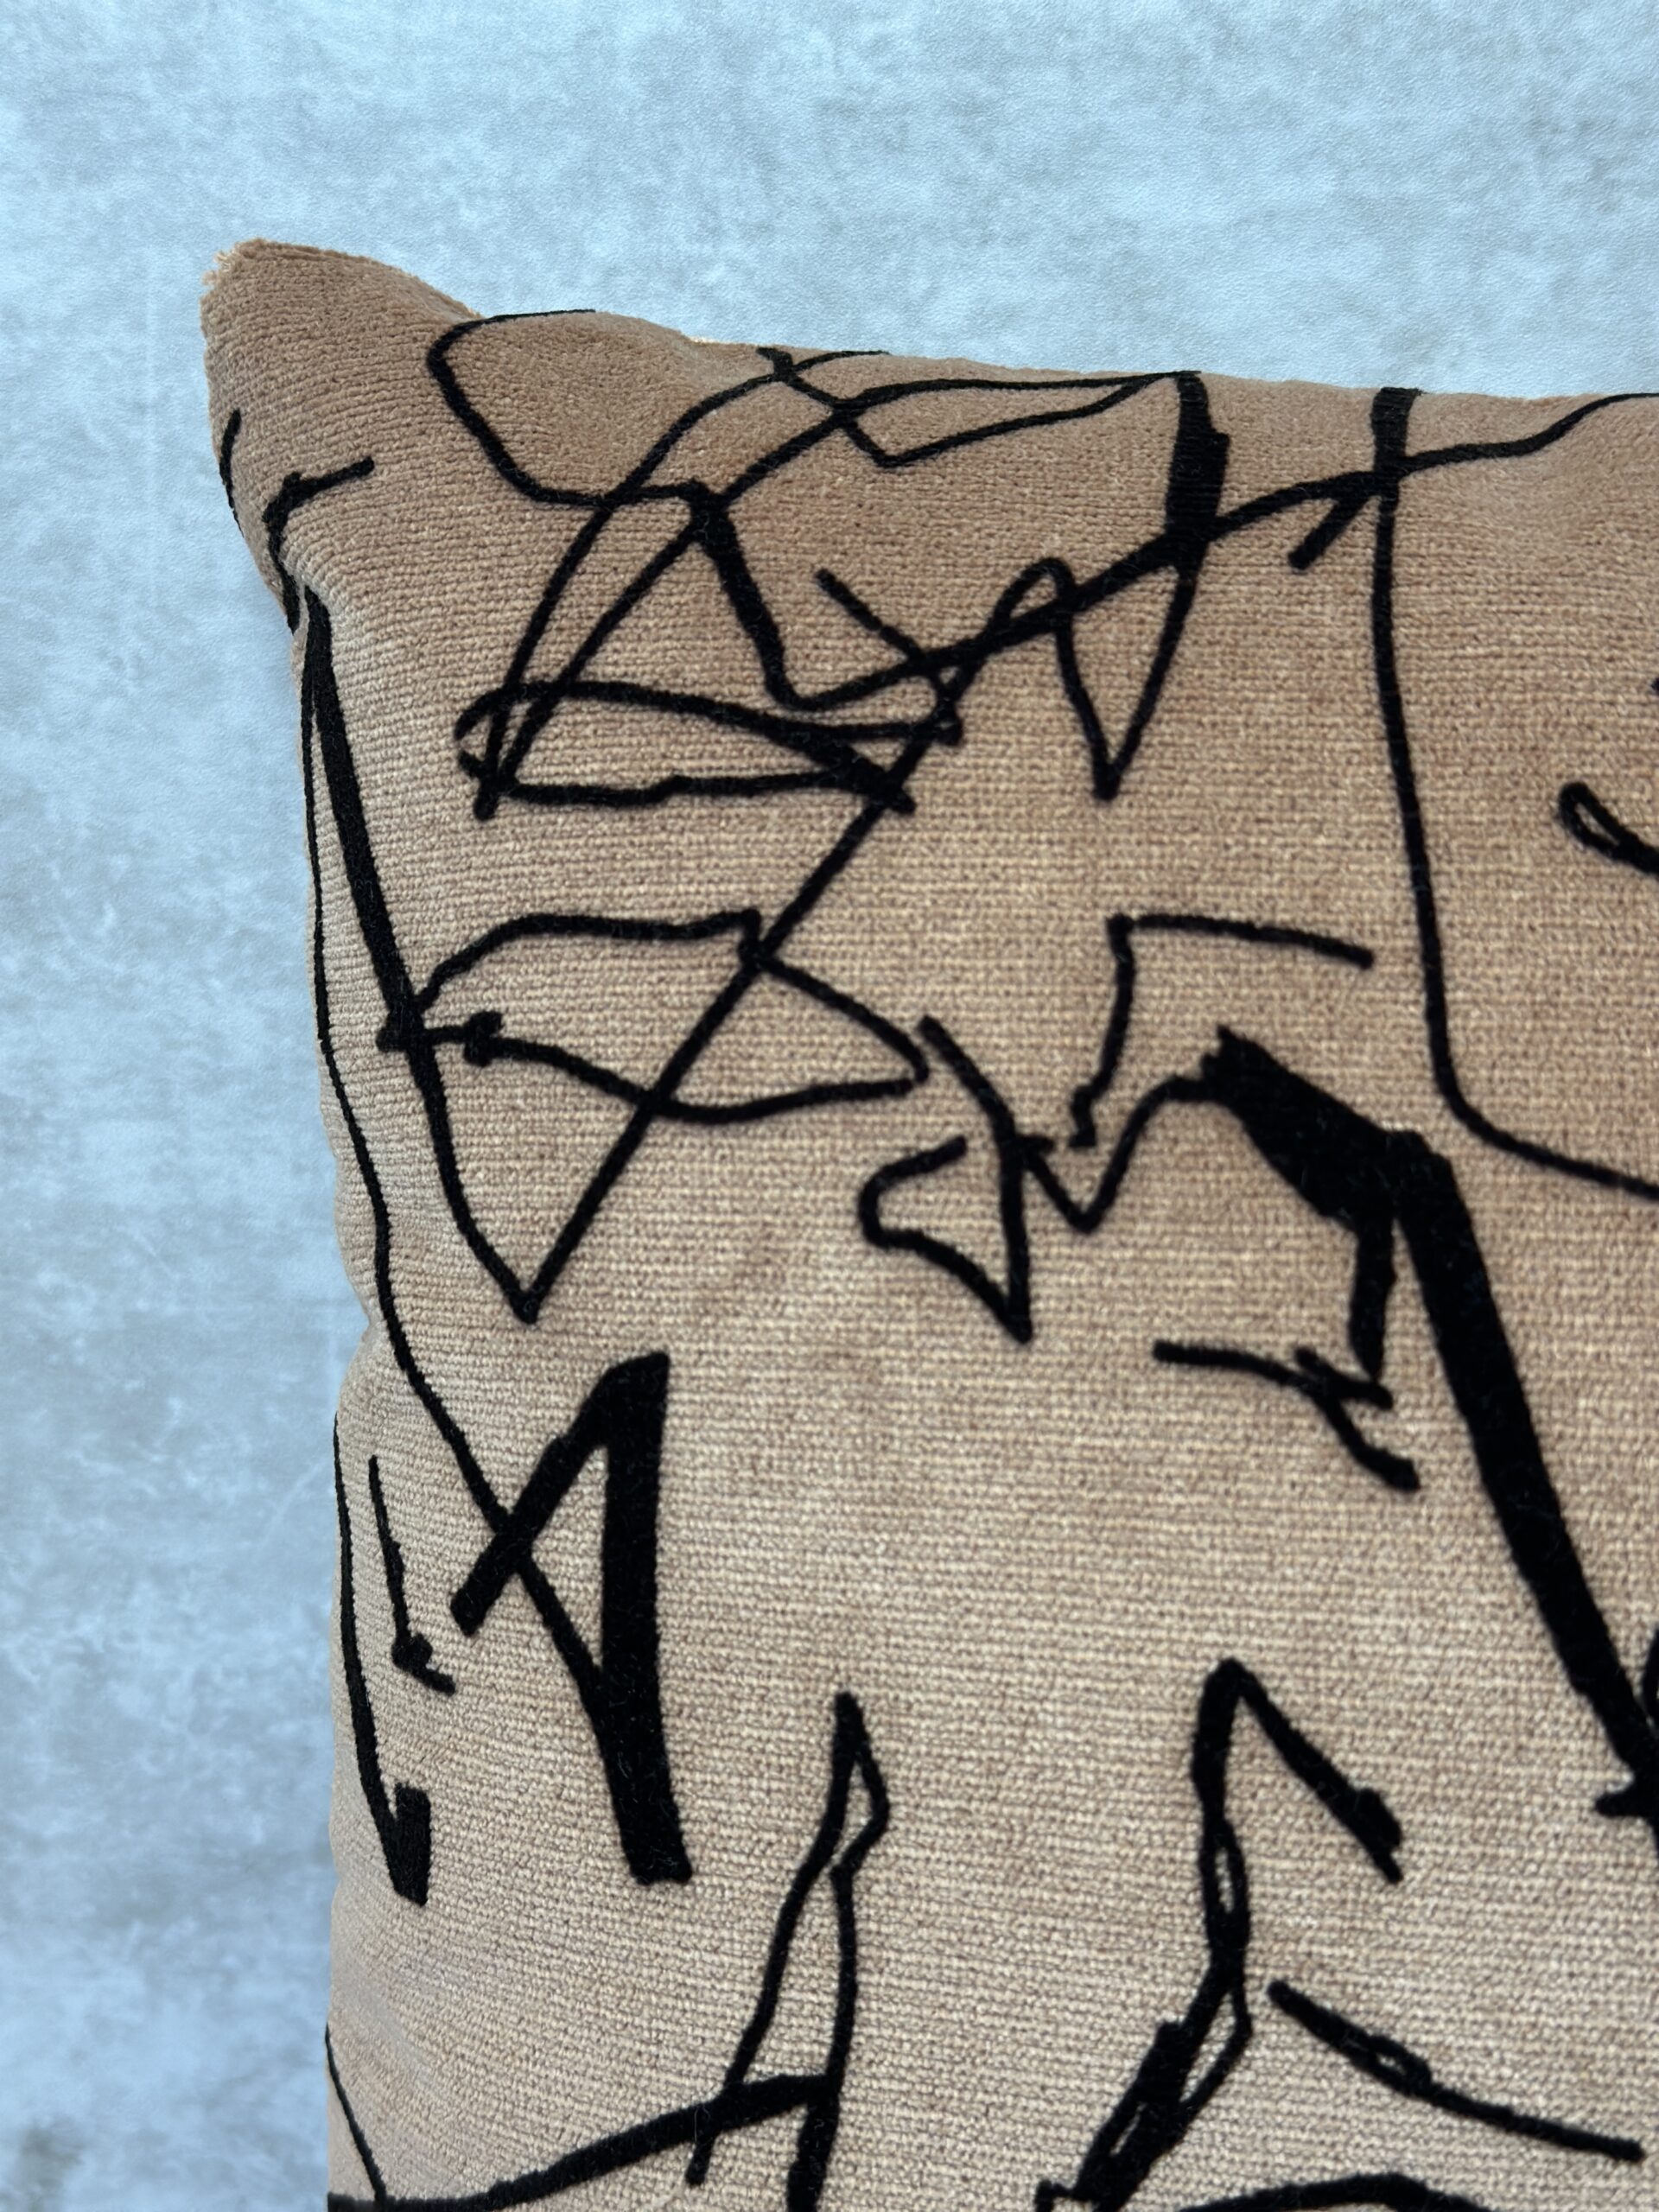 Kirkby Scribbled Recycled Pillows